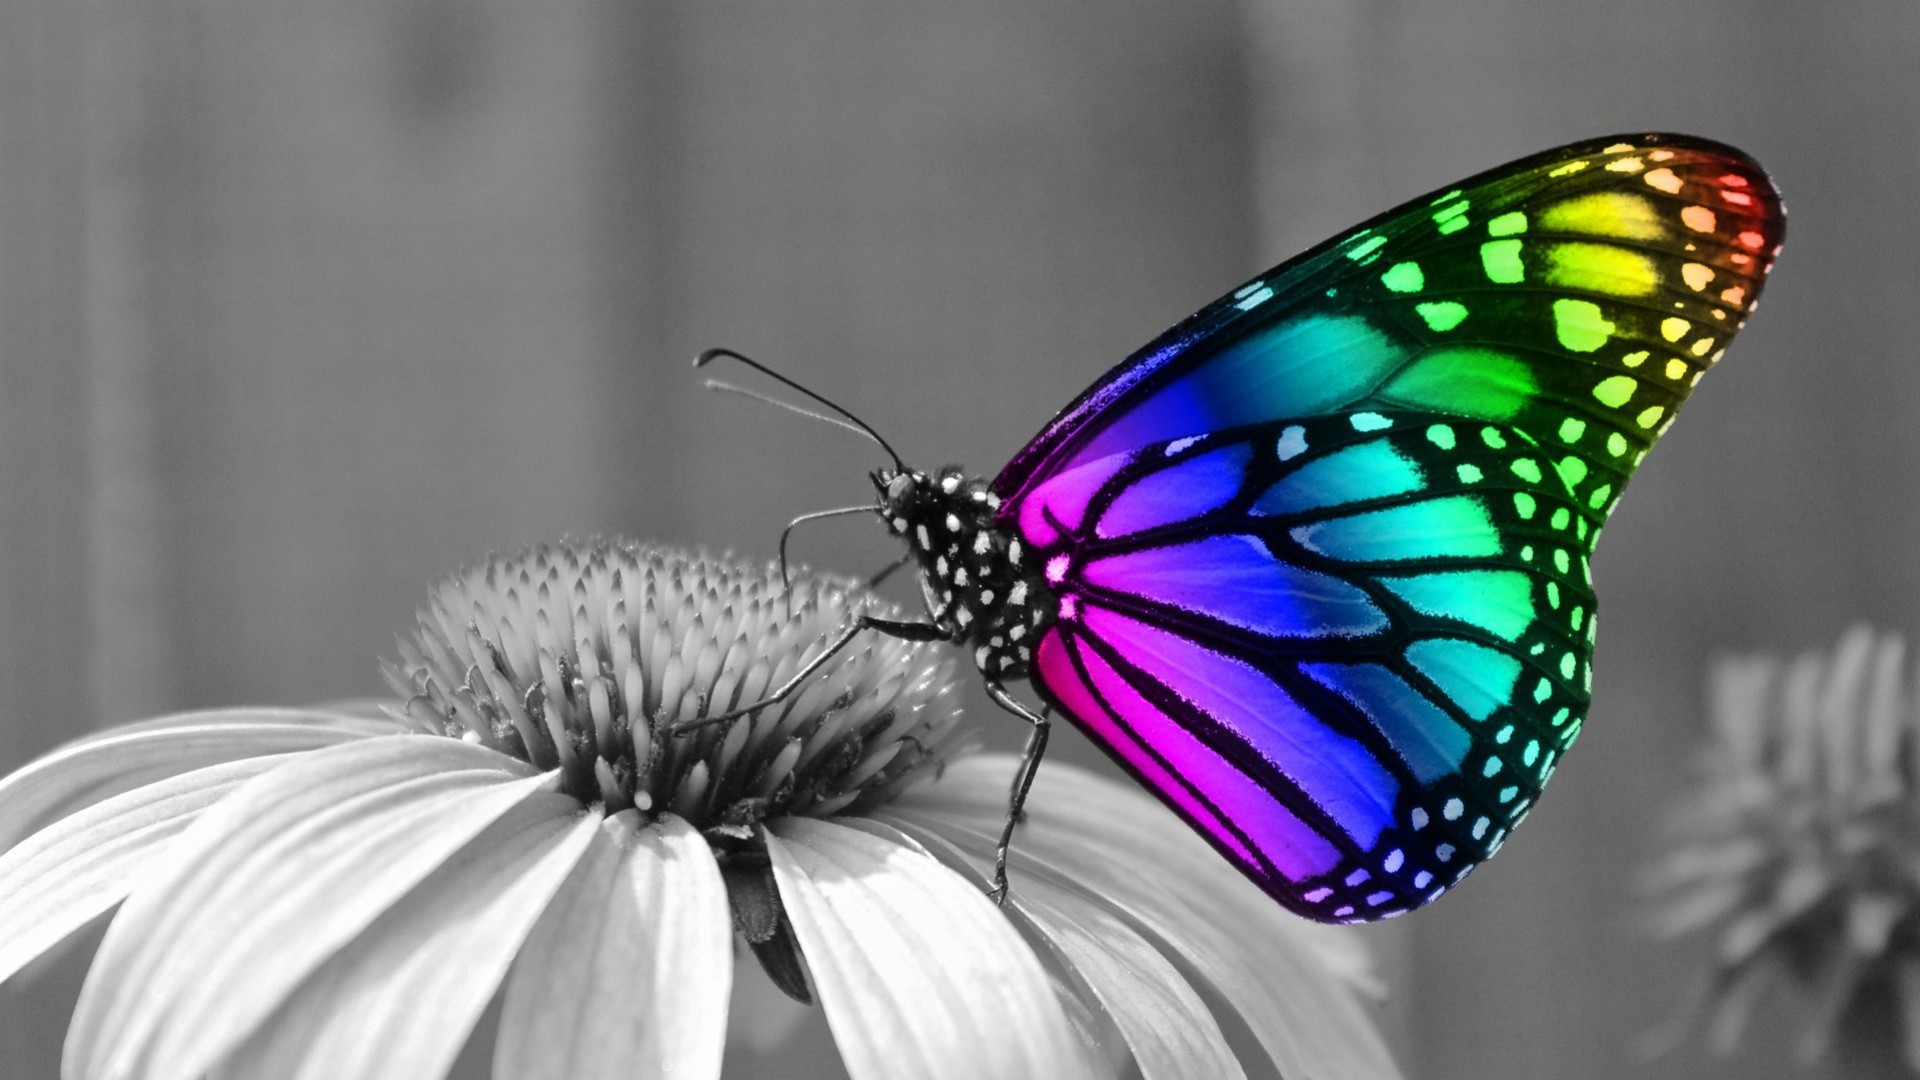 Cute Butterfly HD Wallpaper With Resolution 1920X1080